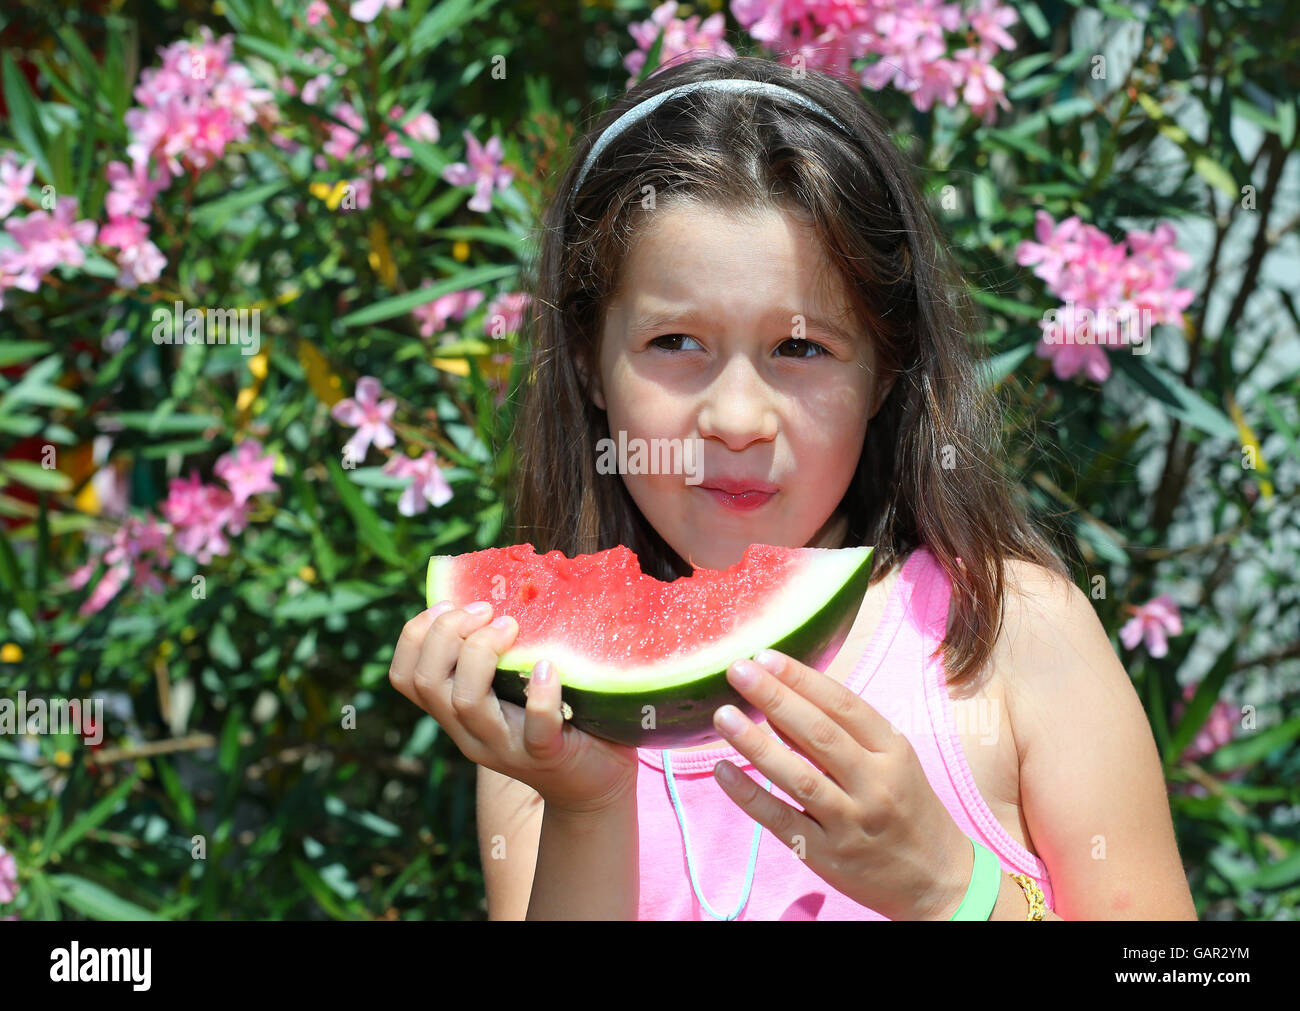 Pretty little girl with long brown hair eating a slice of watermelon in summer Stock Photo